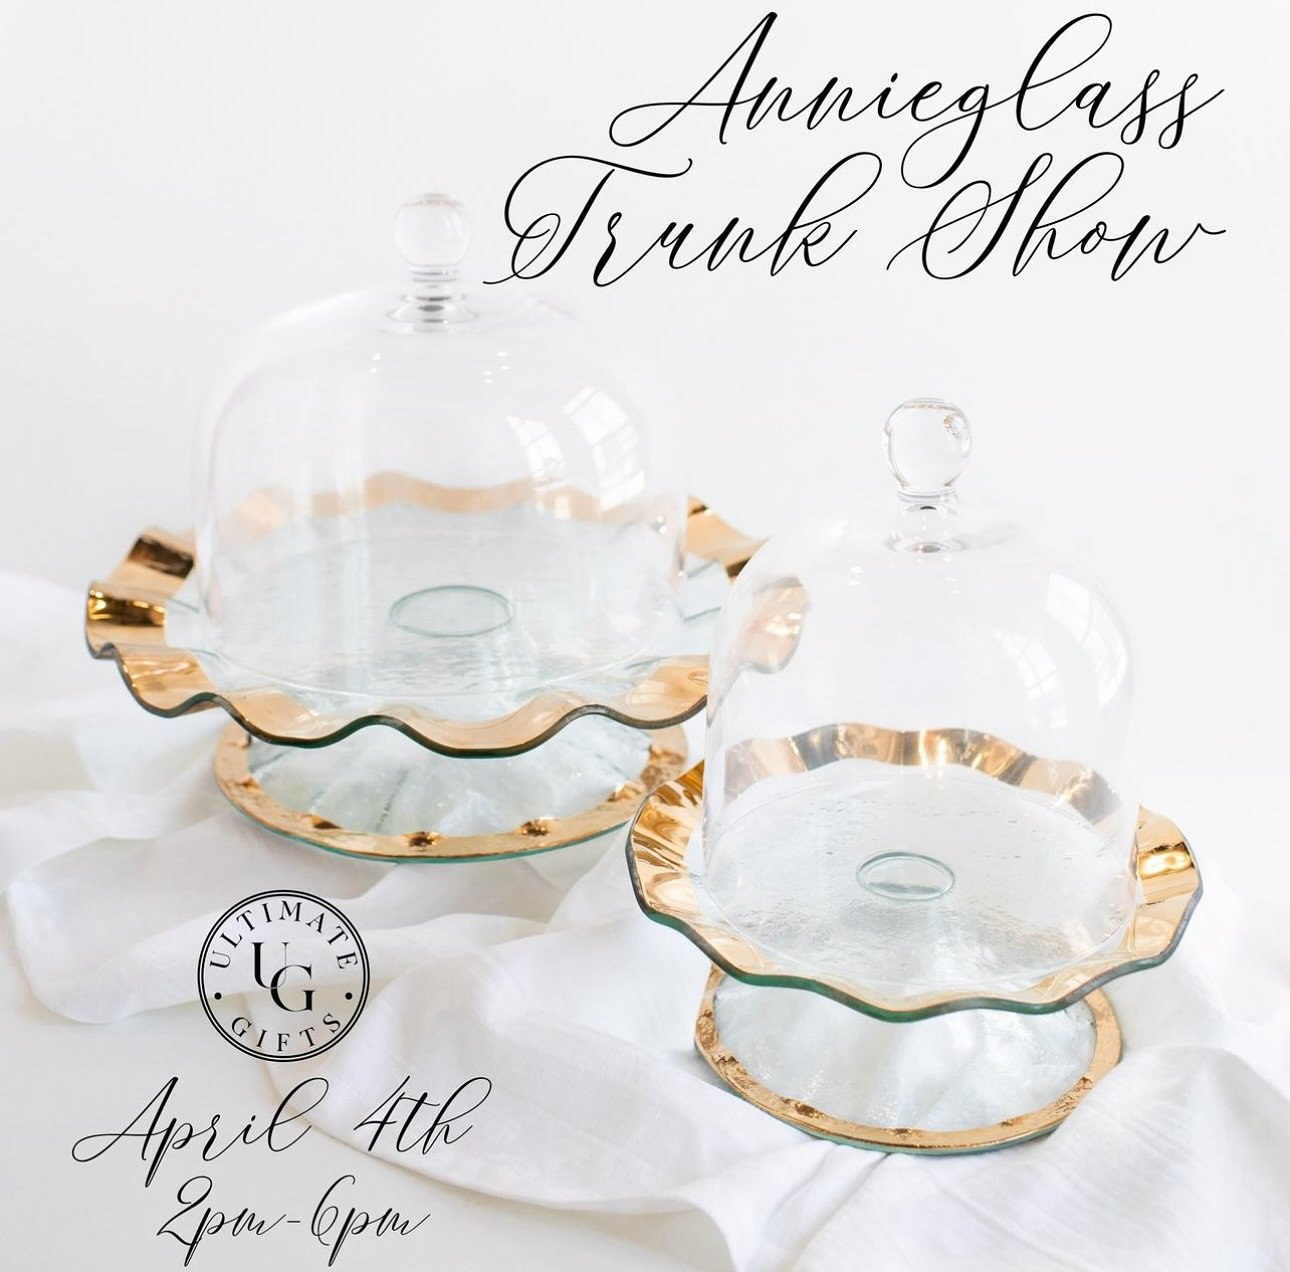 Make plans to stop by Ultimate Gifts THIS Thursday, April 4th, from 2:00-6:00pm for their Annie Glass Trunk Show ✨✨

Unique pieces will be showcased in store and engraving can be purchased on all new pieces. It is recommended to order your engraving 